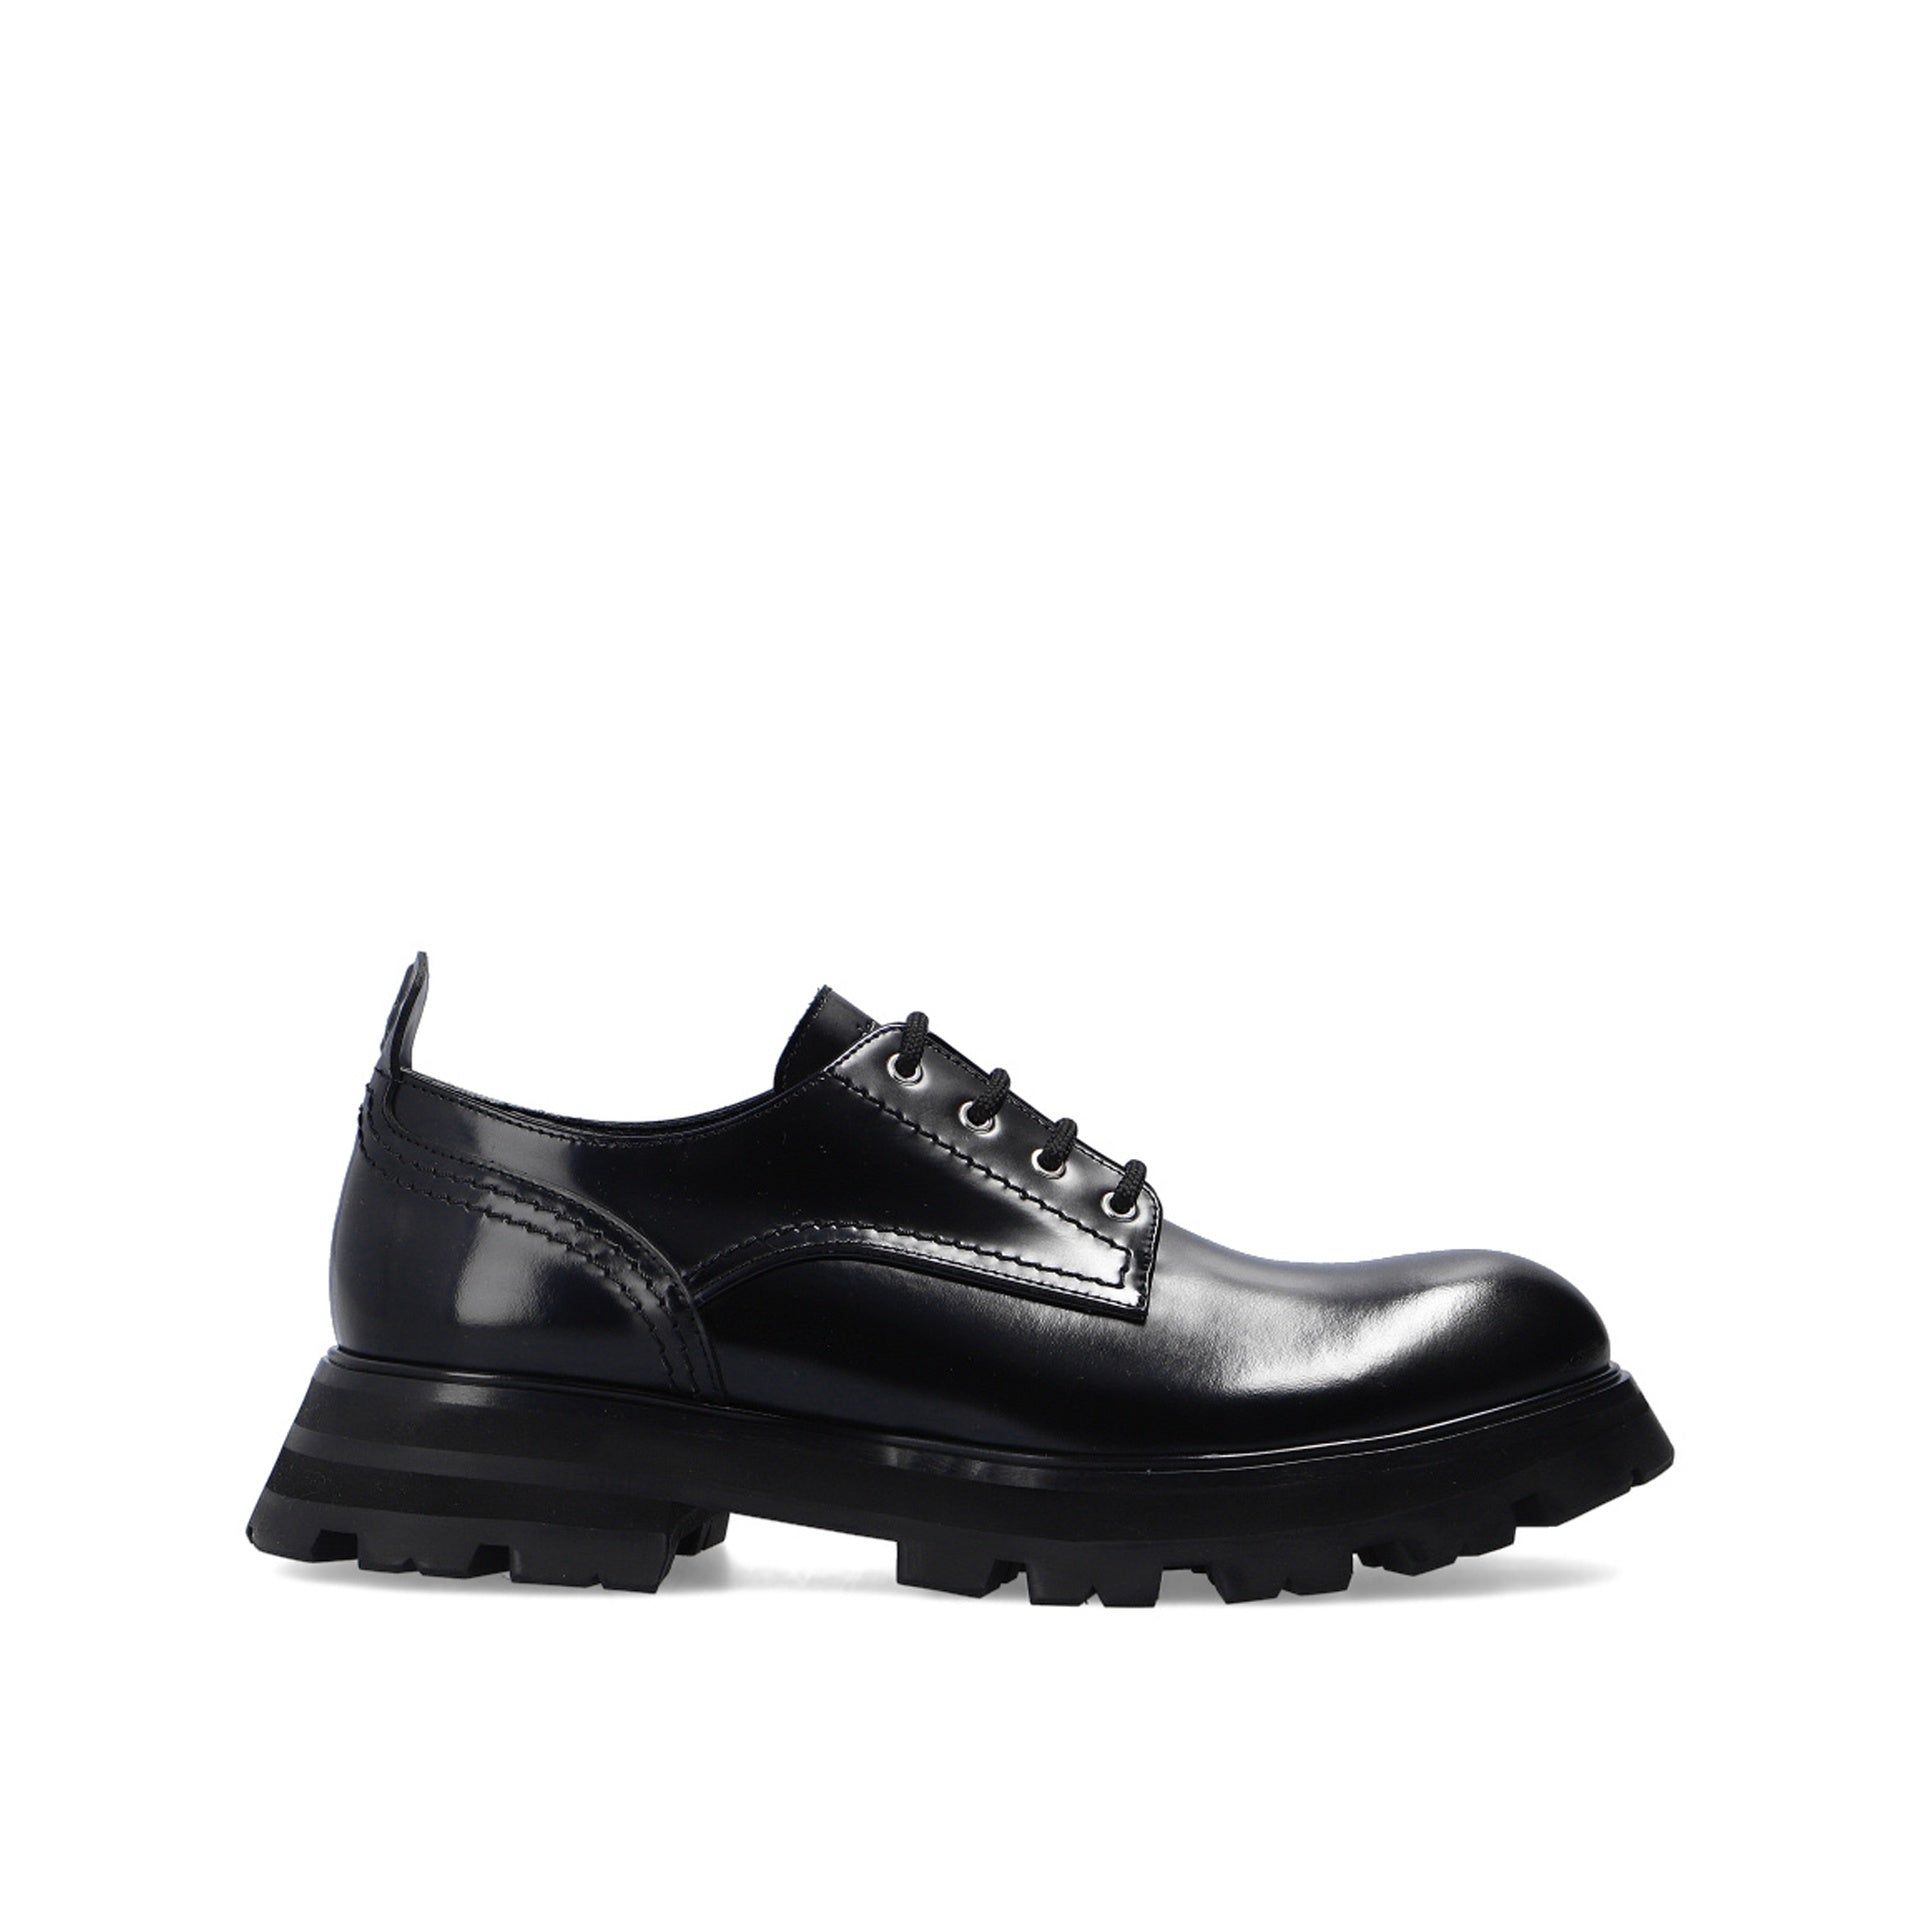 Alexander McQueen Leather Lace-up Shoes